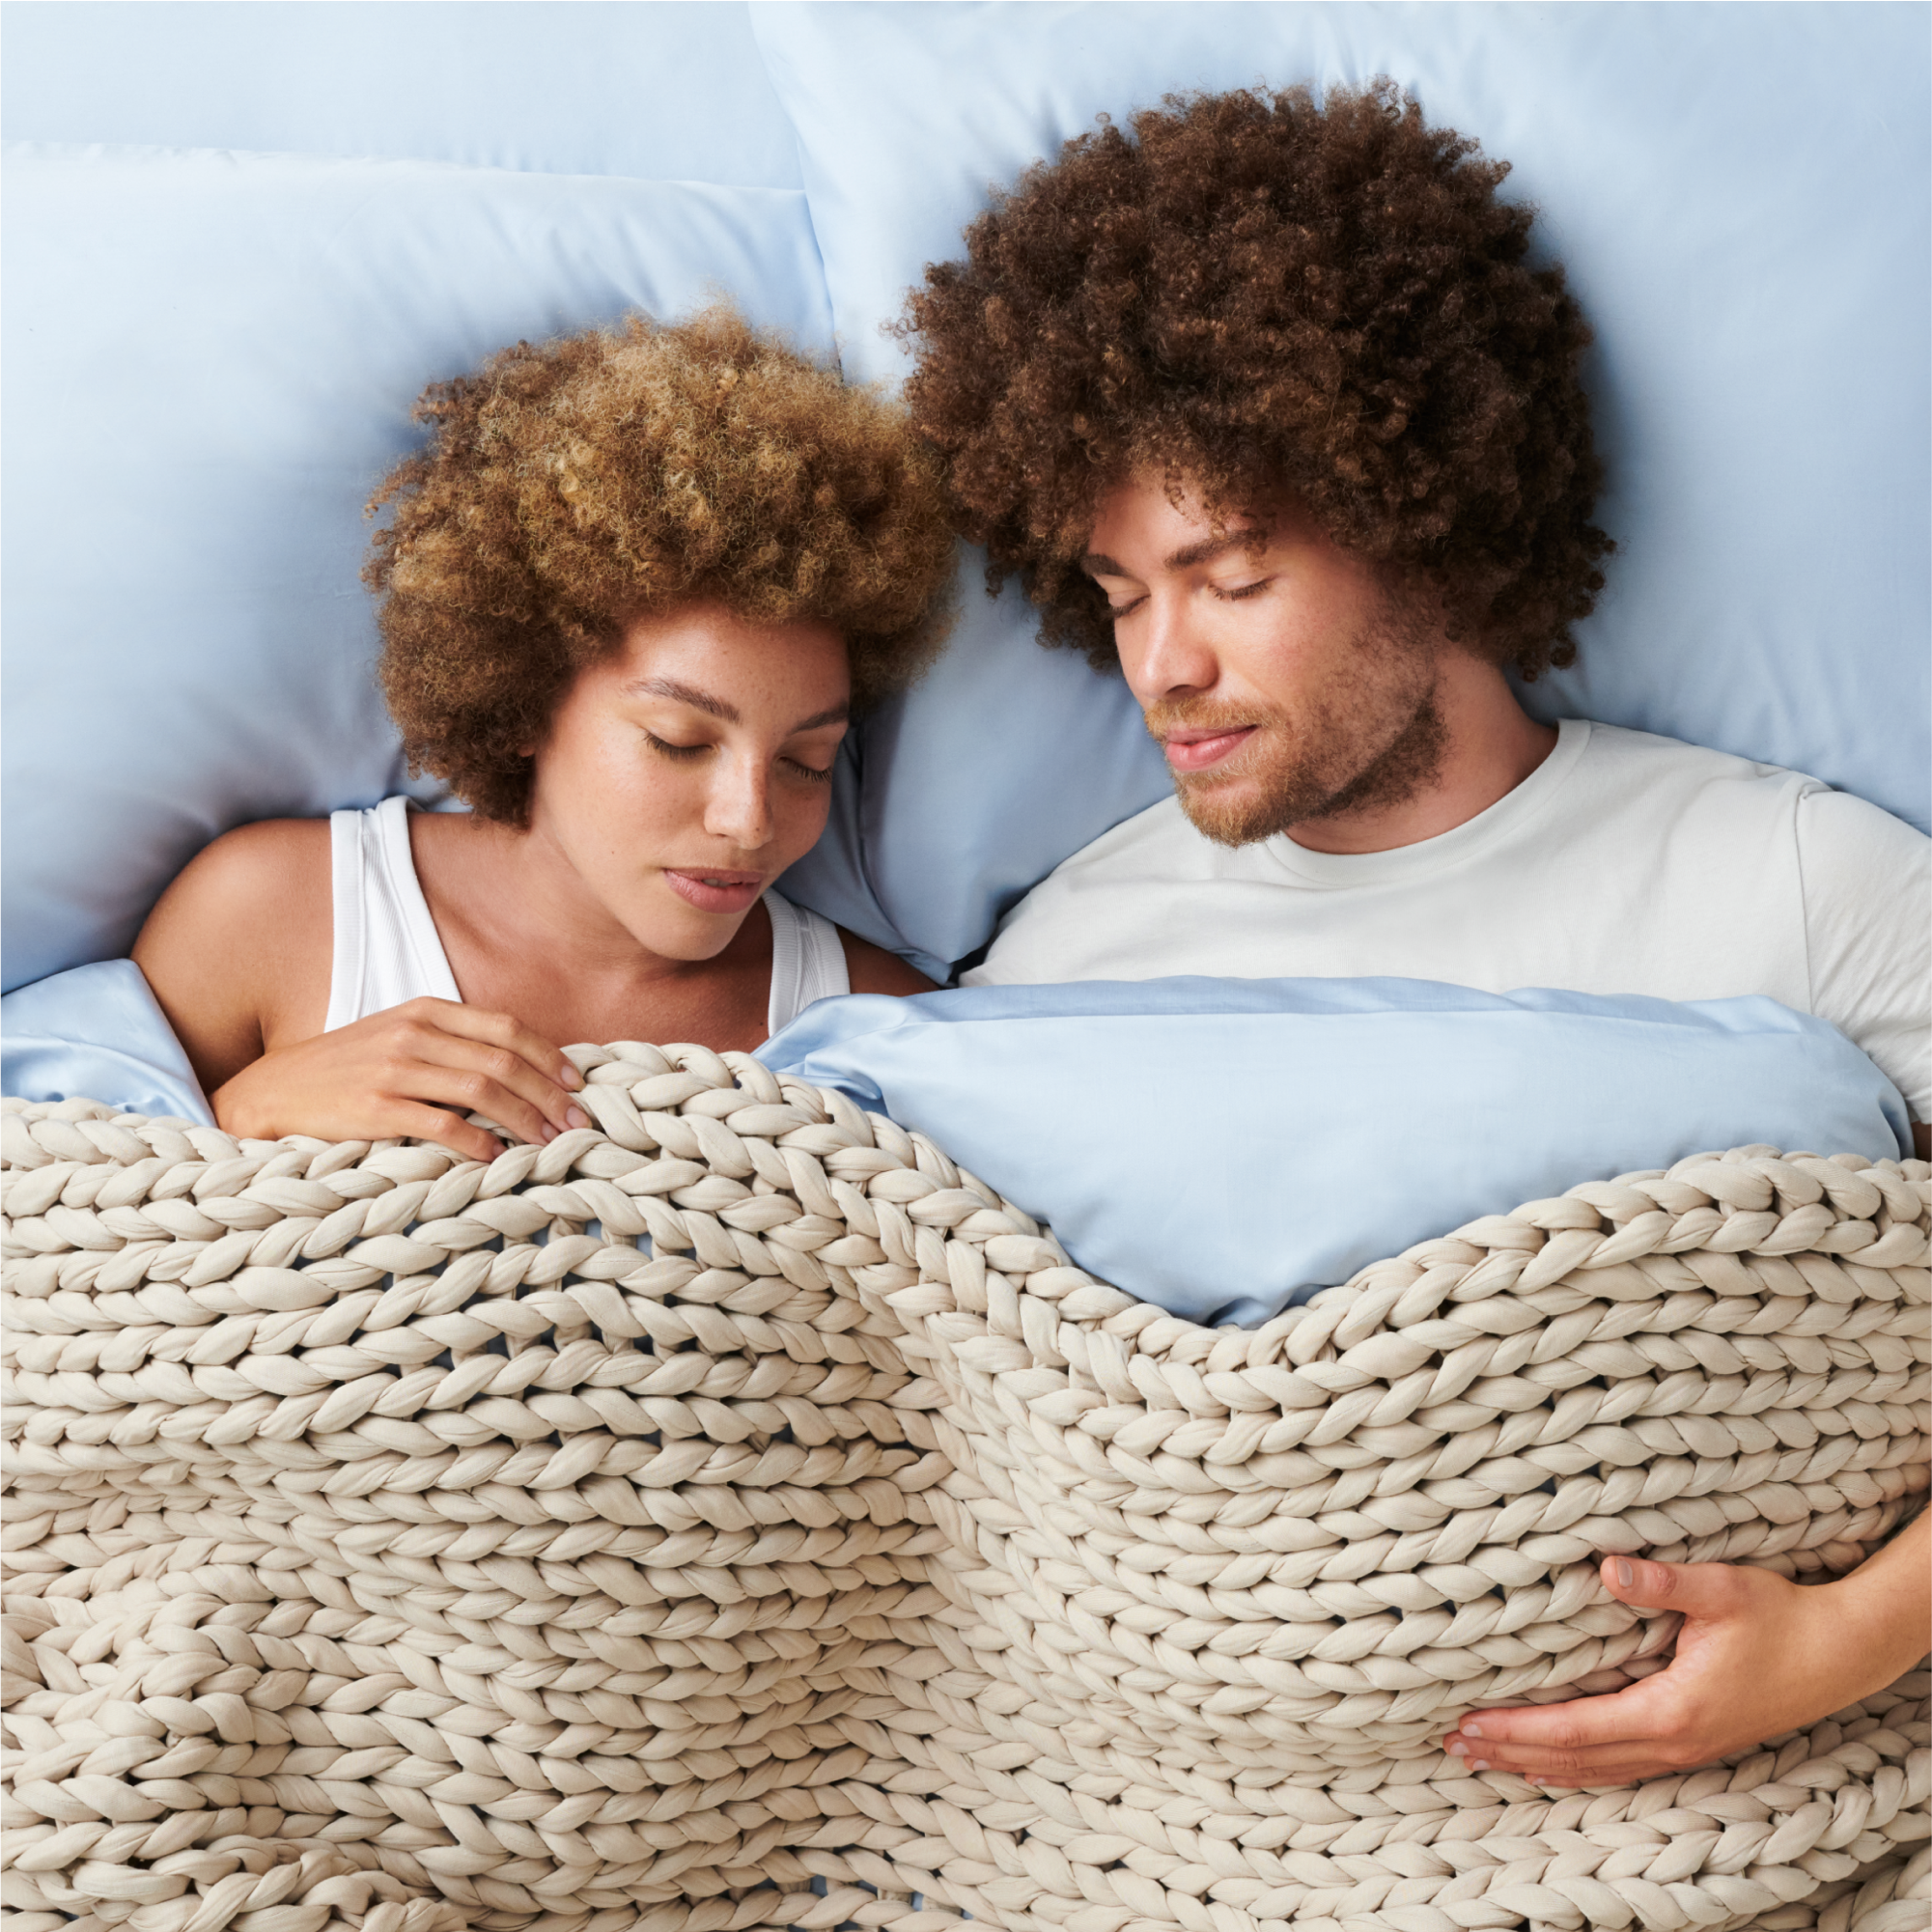 The 7 Best Sleep Music Types and How They Improve Bed Time